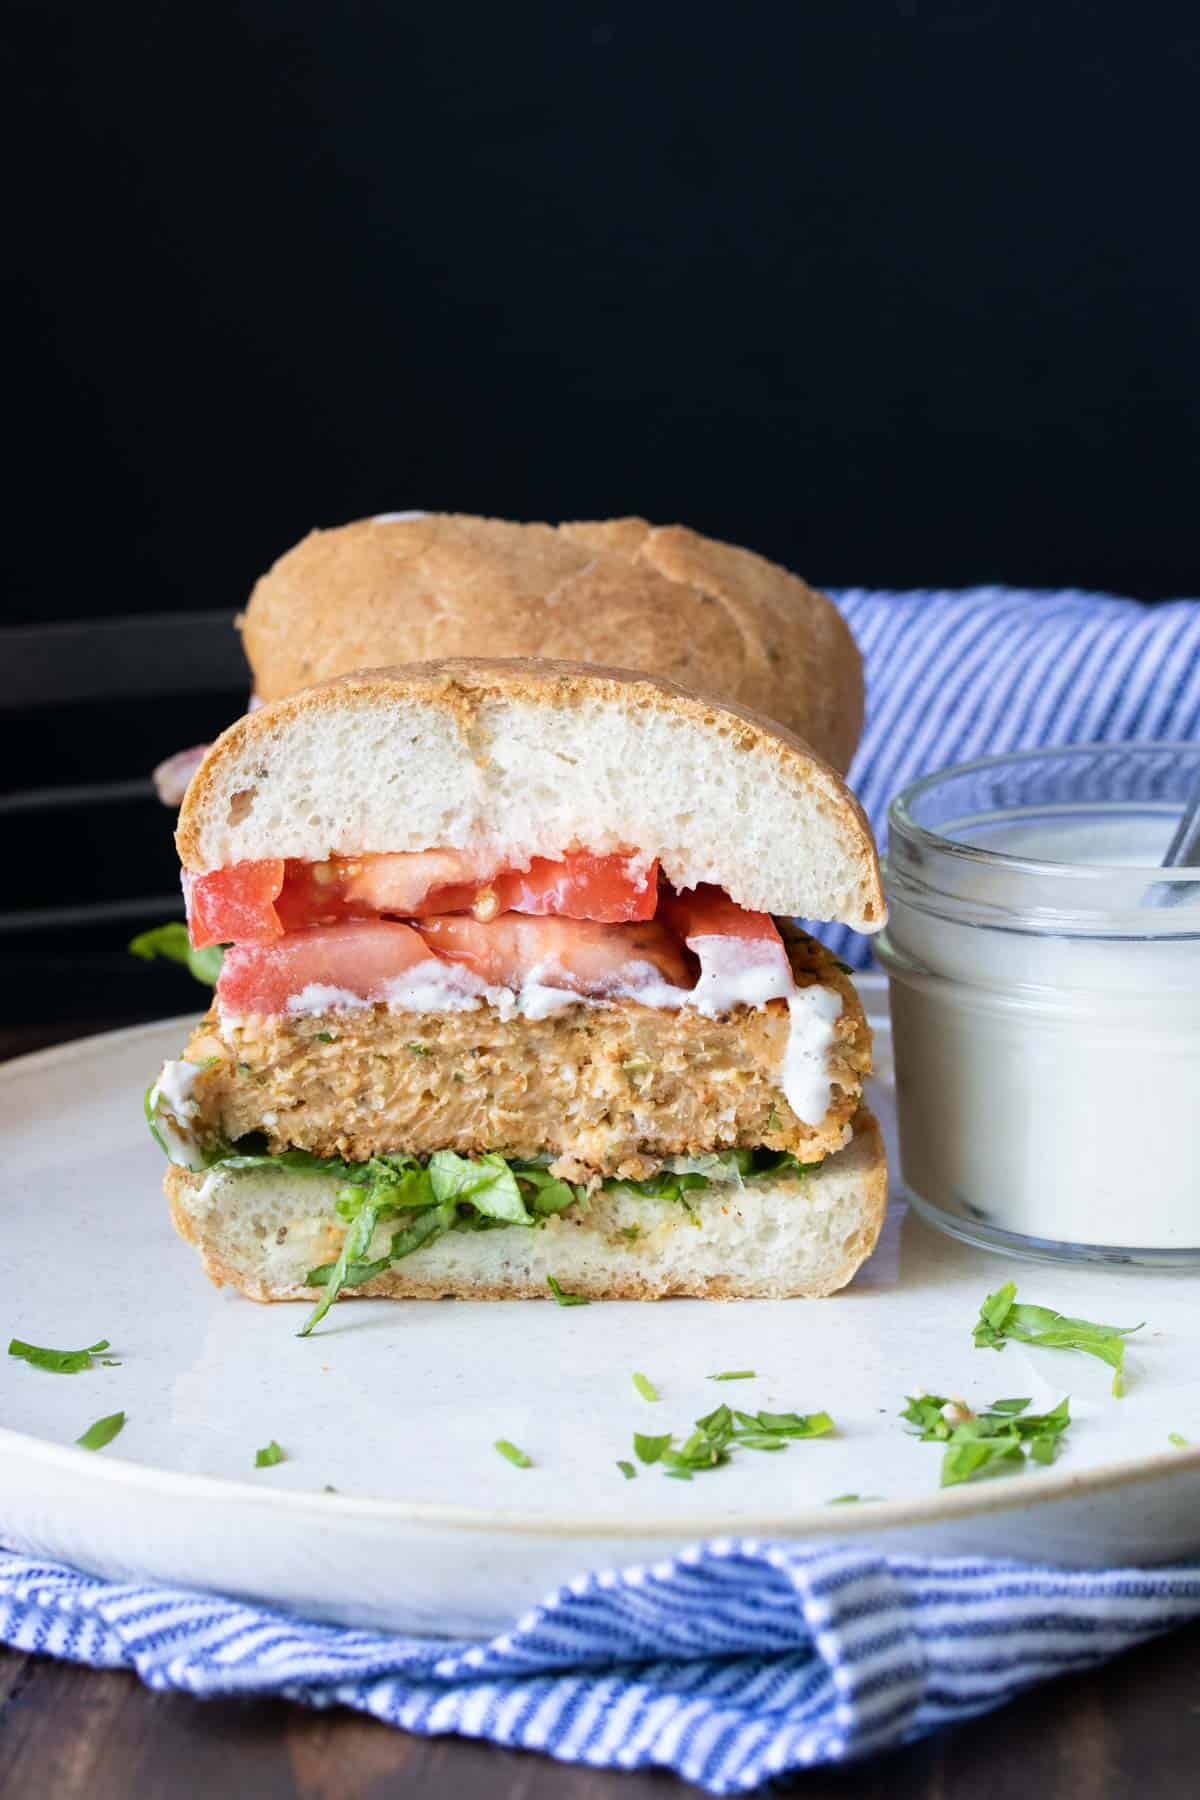 Half of a chickpea burger with lettuce, tomato and dripping sauce.